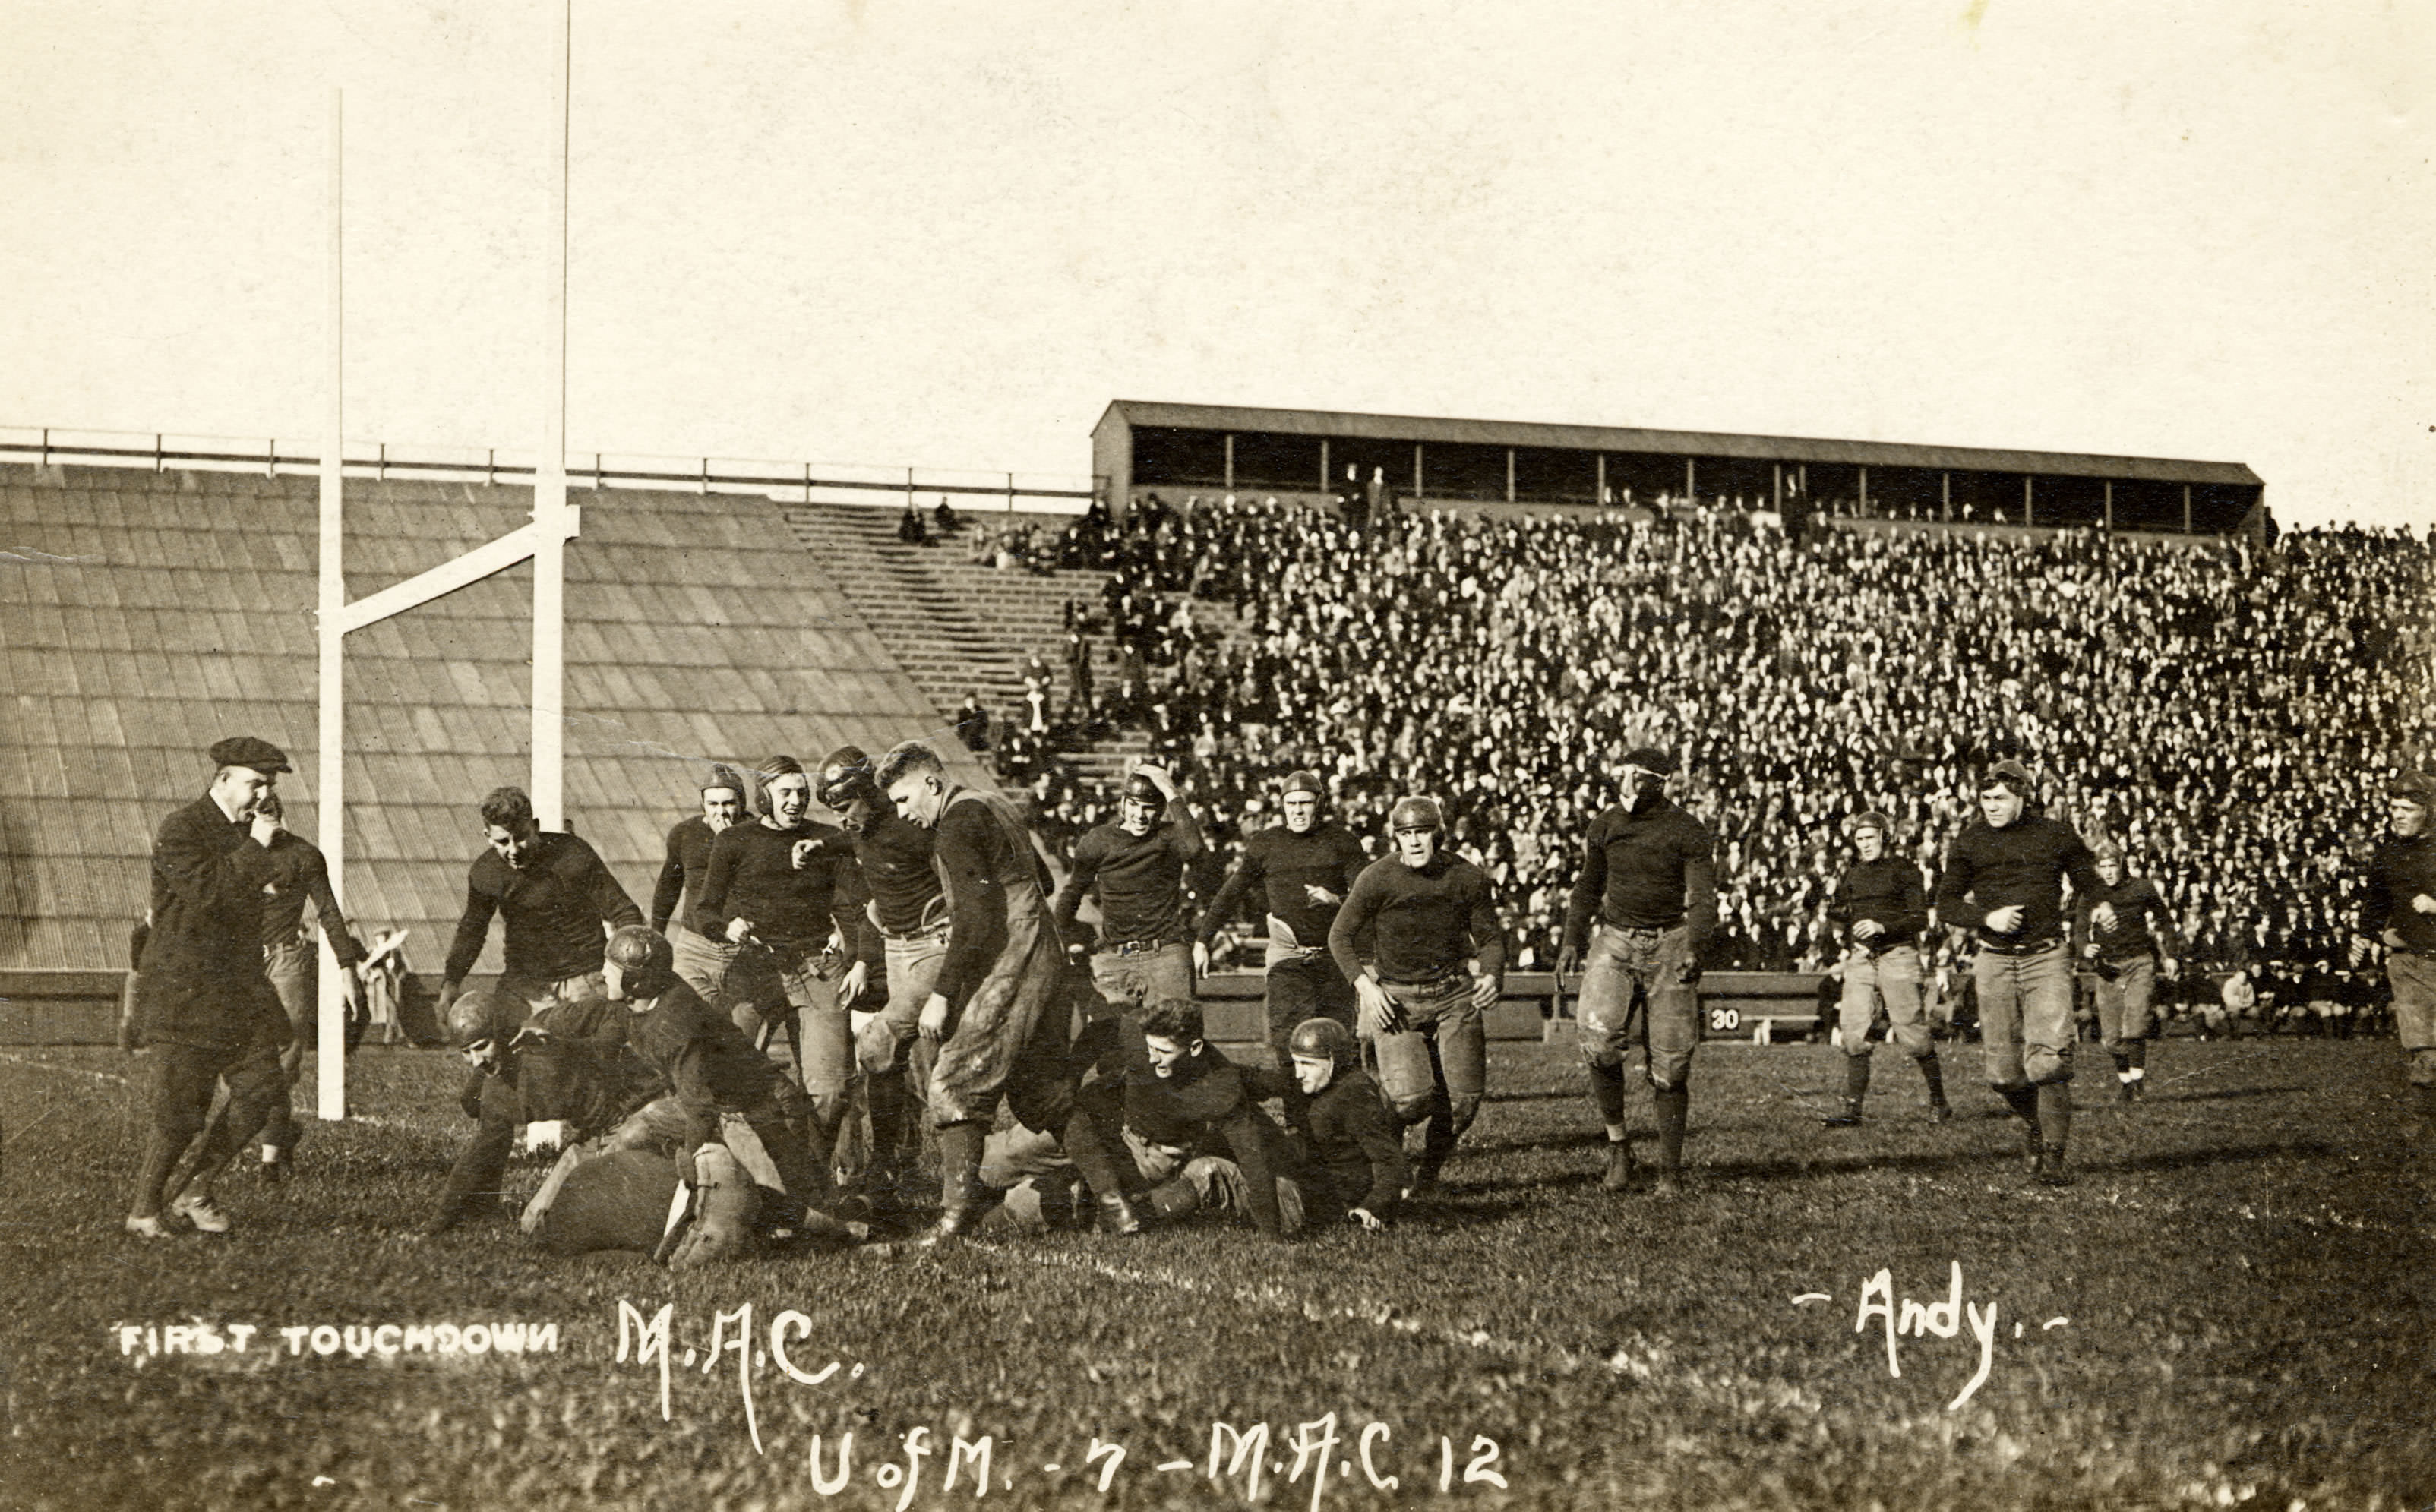 The University of Michigan playing Michigan State University in American Football in Michigan, US in 1913. In the late 1800s and early 1900s, clubs and colleges started changing the rules of American Rugby which developed into American Football. The biggest change that made the game something completely different was the addition of the forward pass, which was added in 1906. As you can see, the goal post is at the touchdown line, some of the players are not wearing helmets, but the referee does still have a whistle. Football evolved drastically and is the most popular sport in the US. The rest of the world still does not really care for this sport, and with the deadly consequences of all the hits and concussions, the sport may have reached its peak.